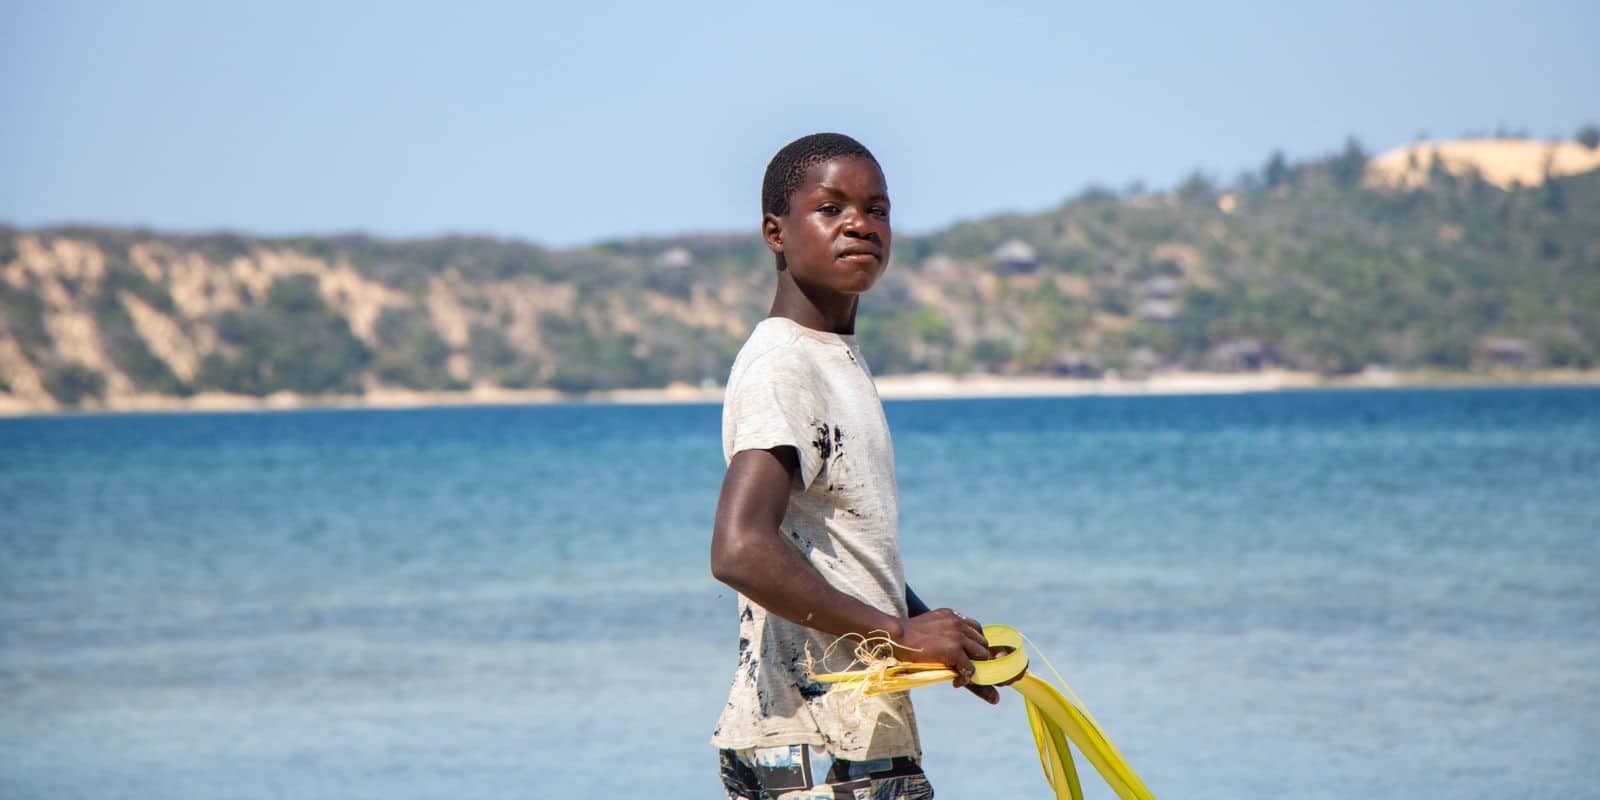 a local kid walking by the beach in Mozambique